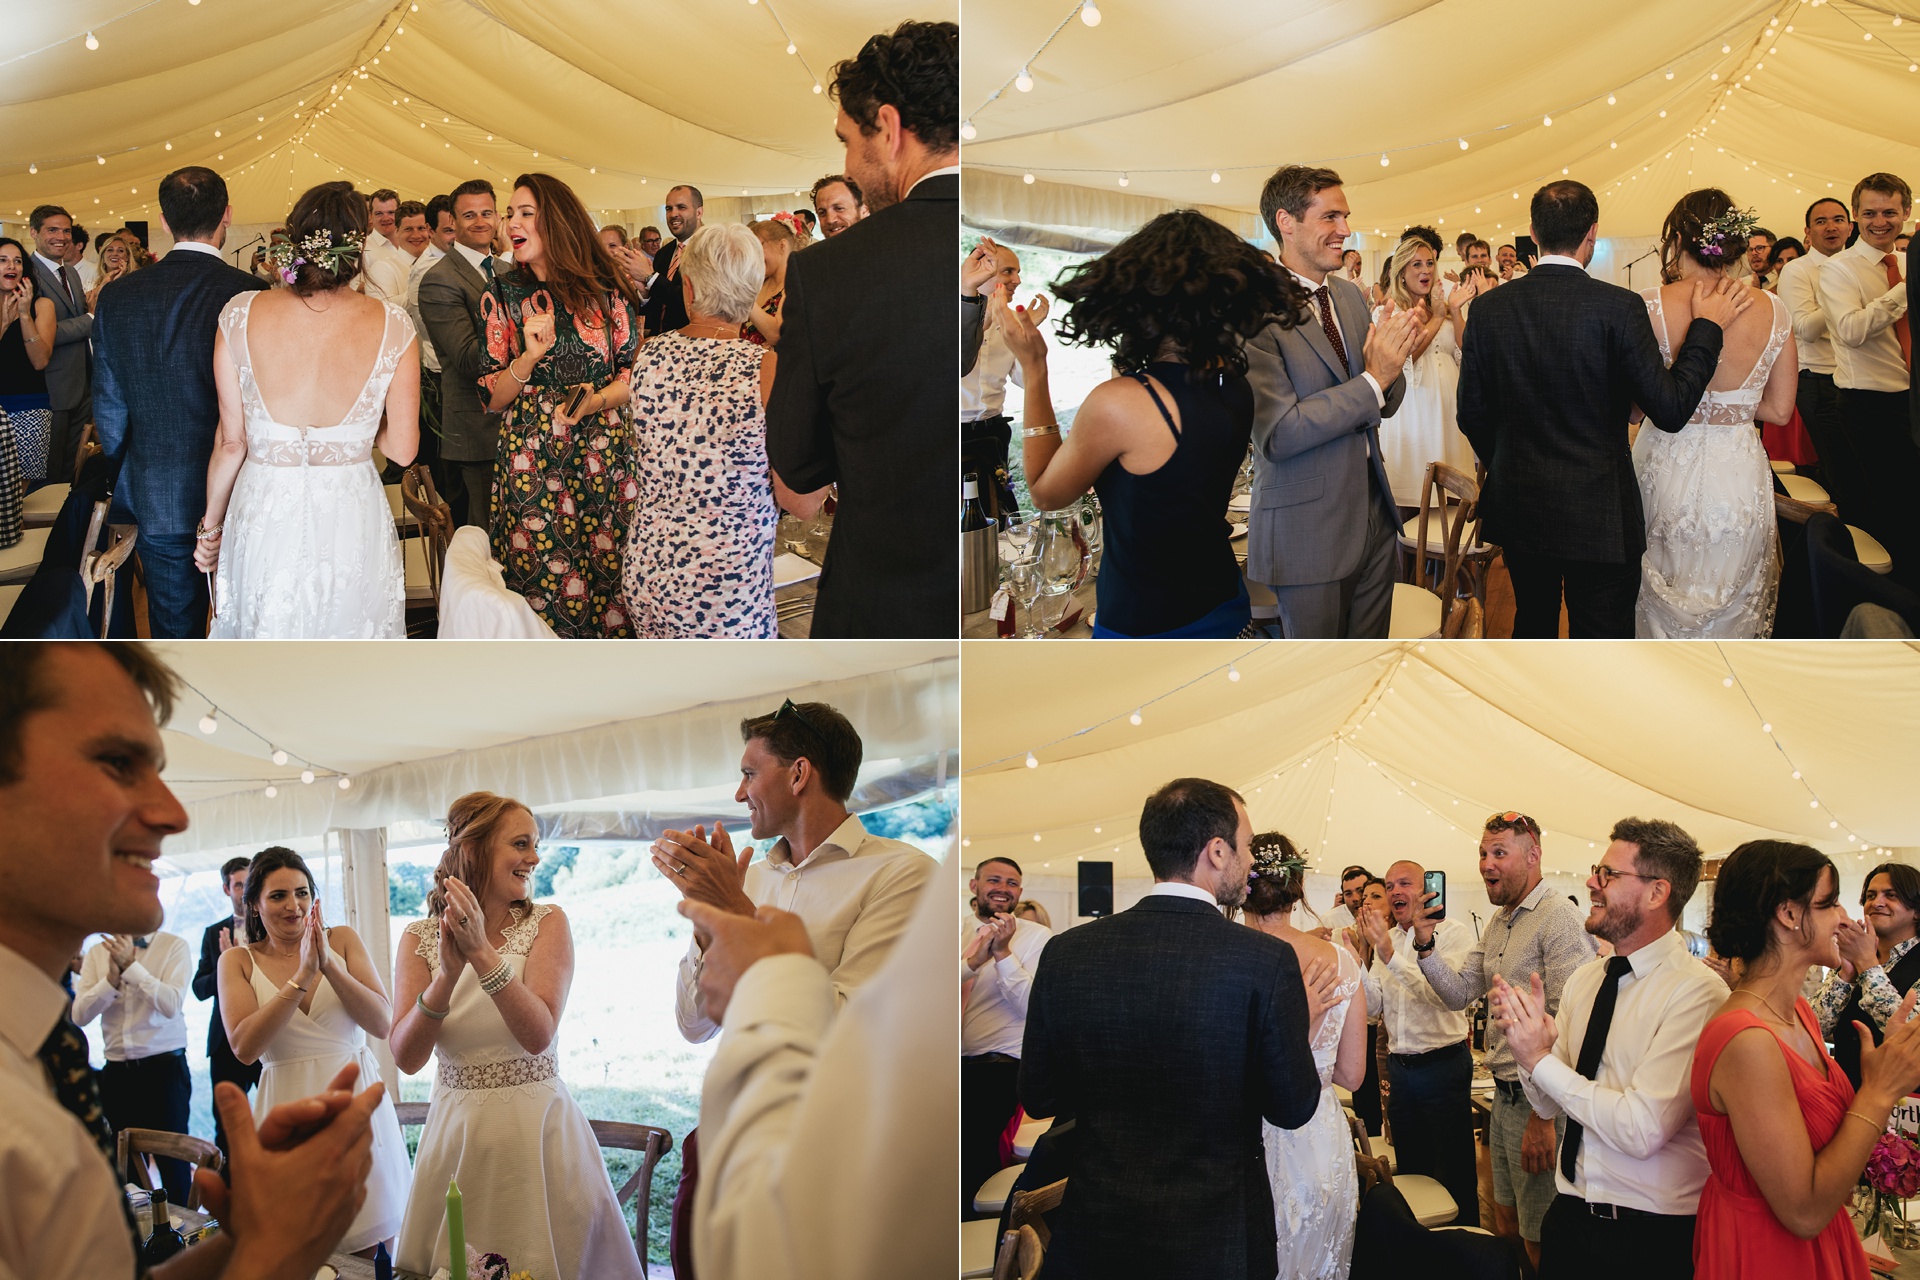 Guests cheering and clapping as bride and groom enter marquee